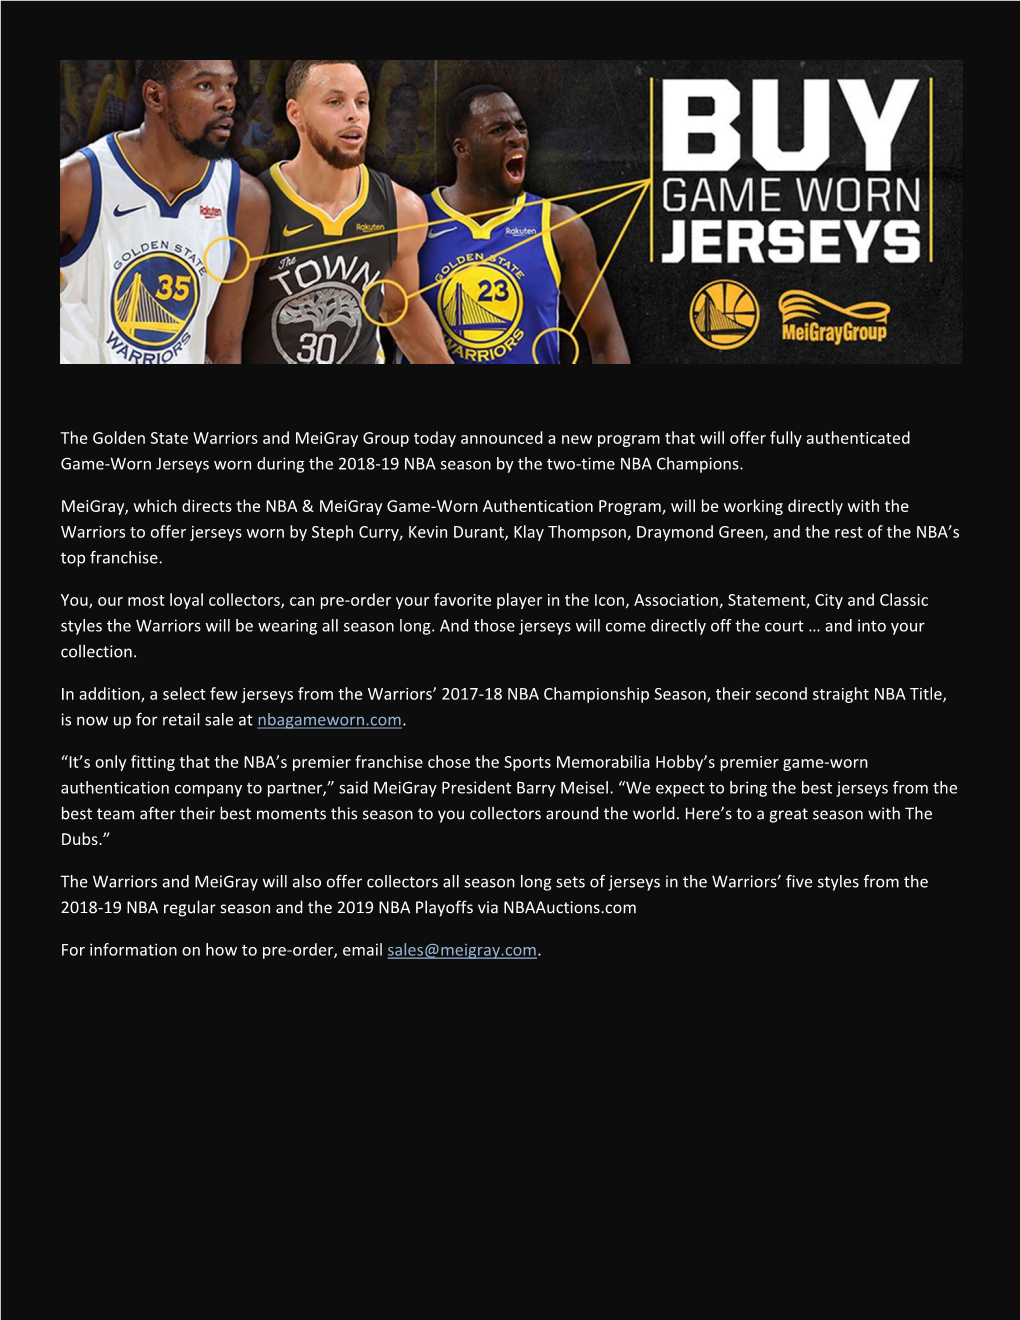 The Golden State Warriors and Meigray Group Today Announced A